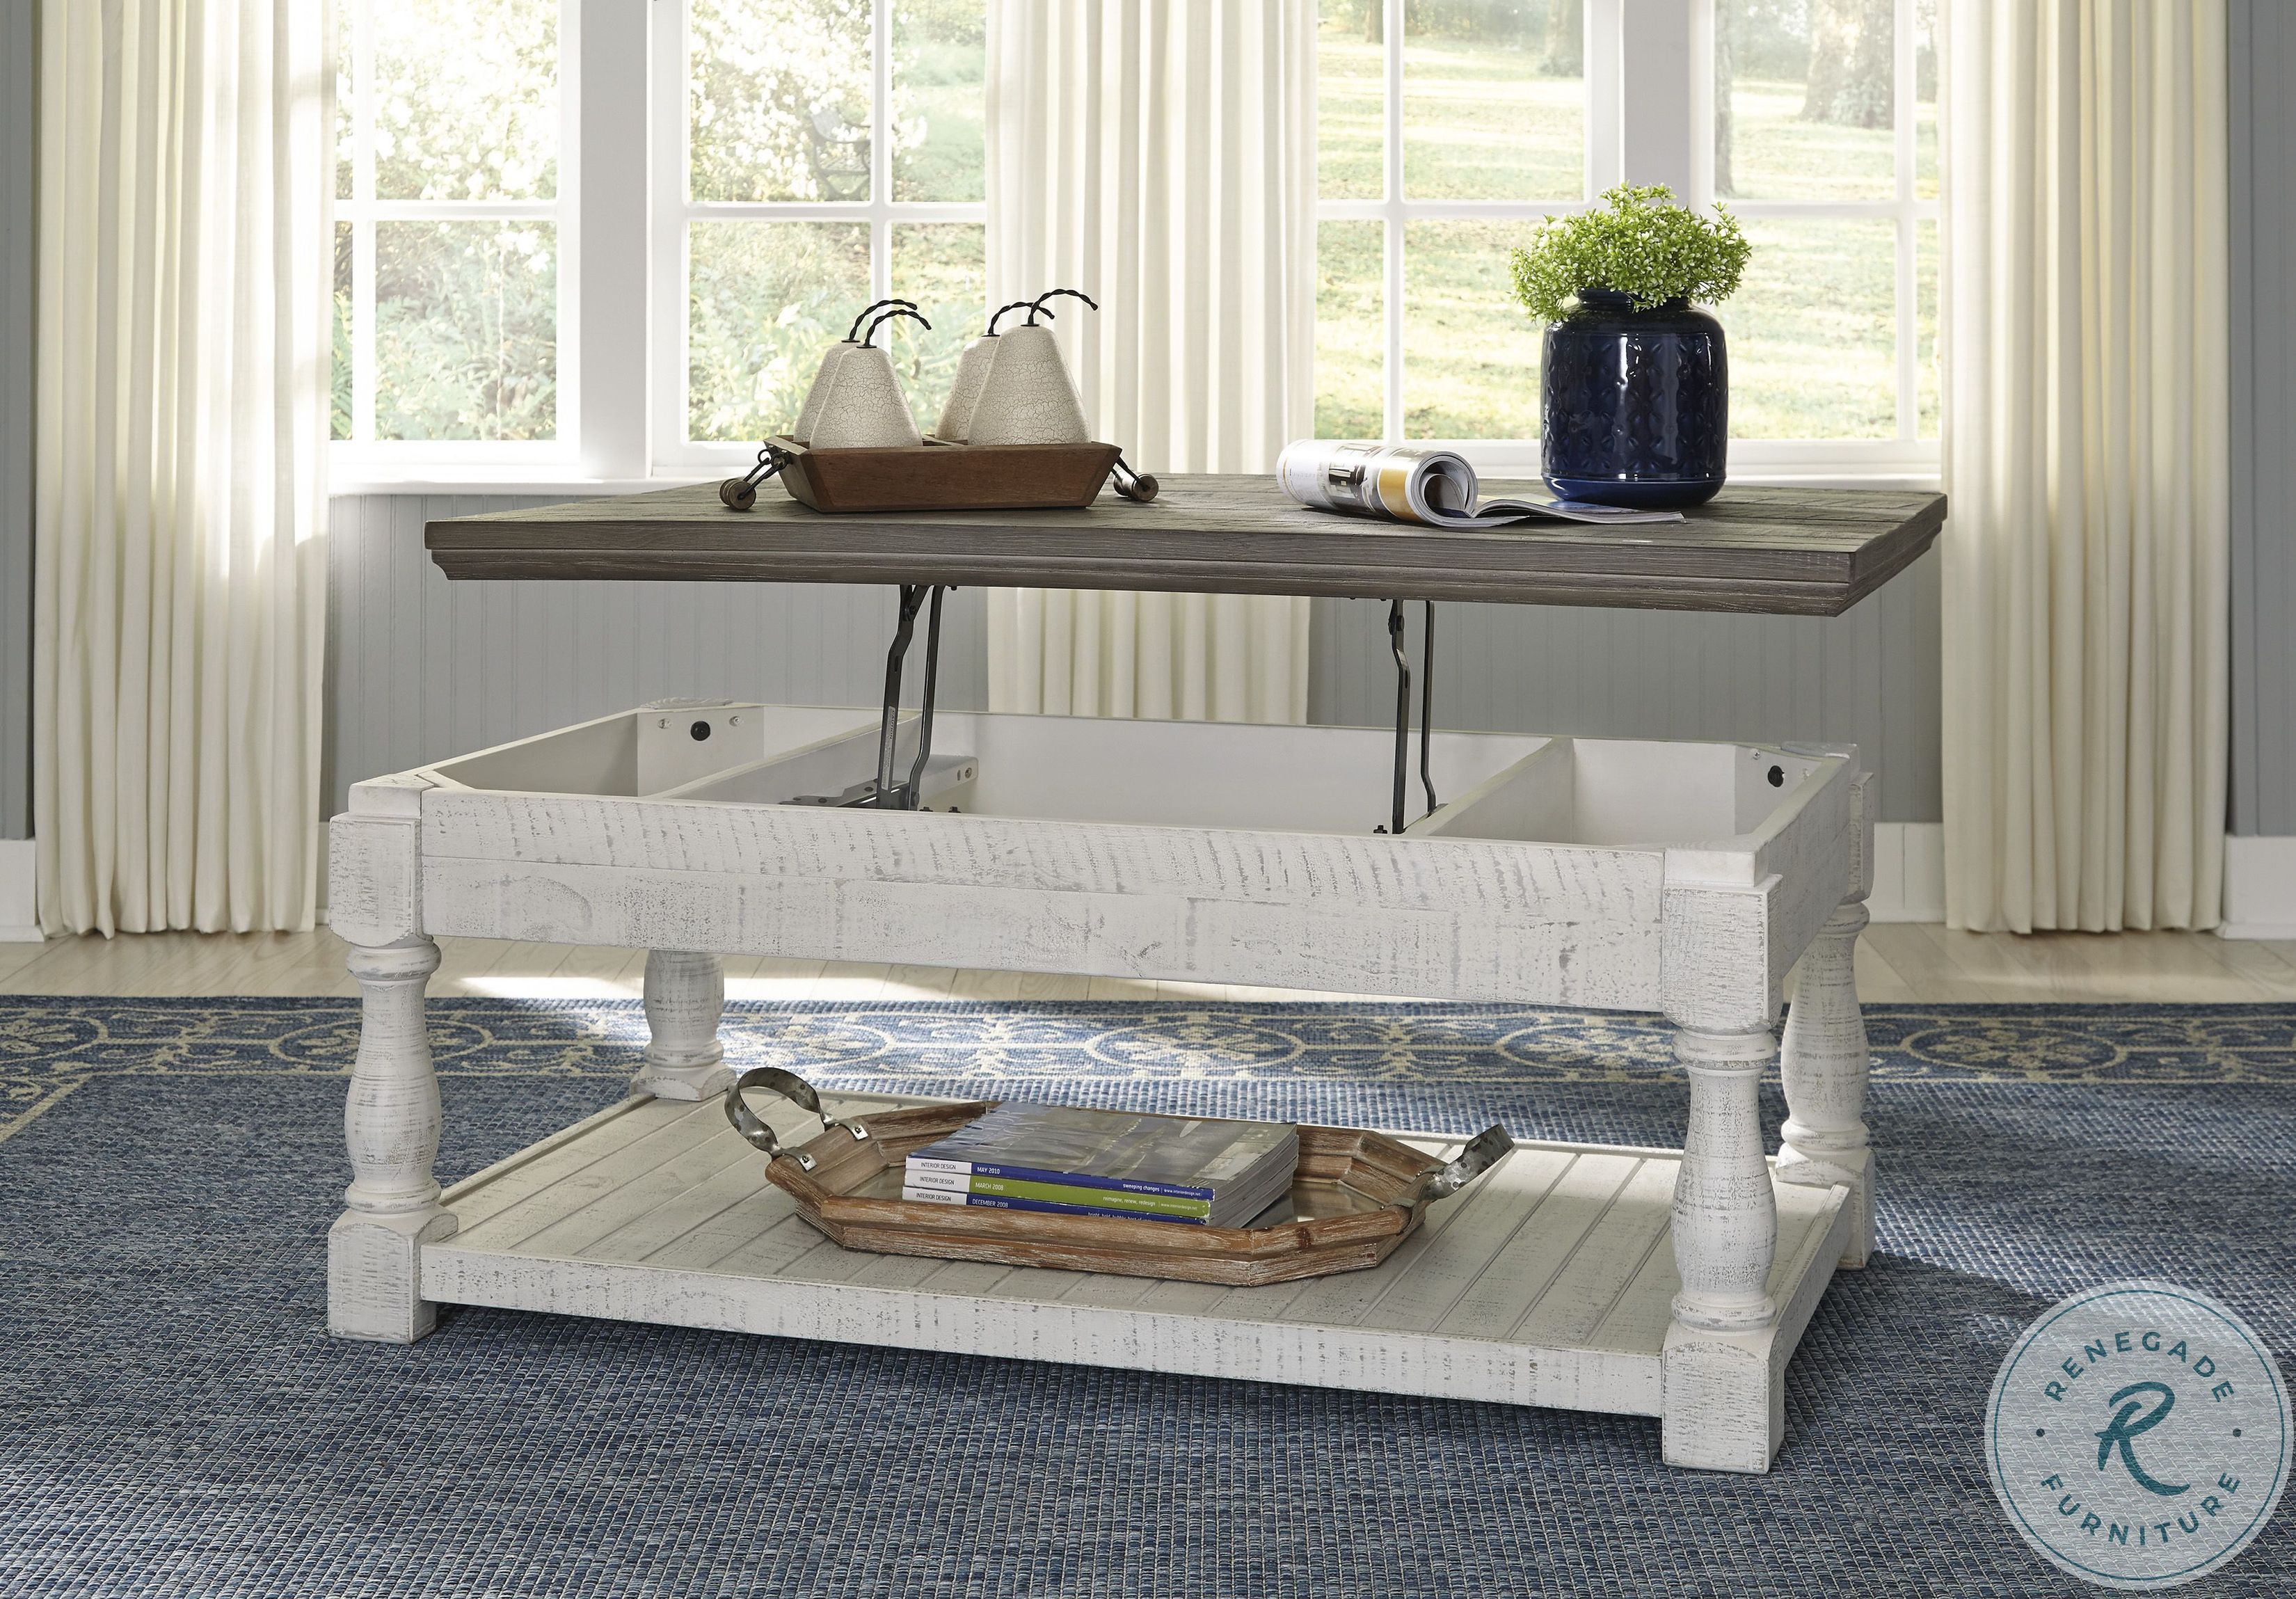 Havalance Gray And White Lift Top Coffee Table